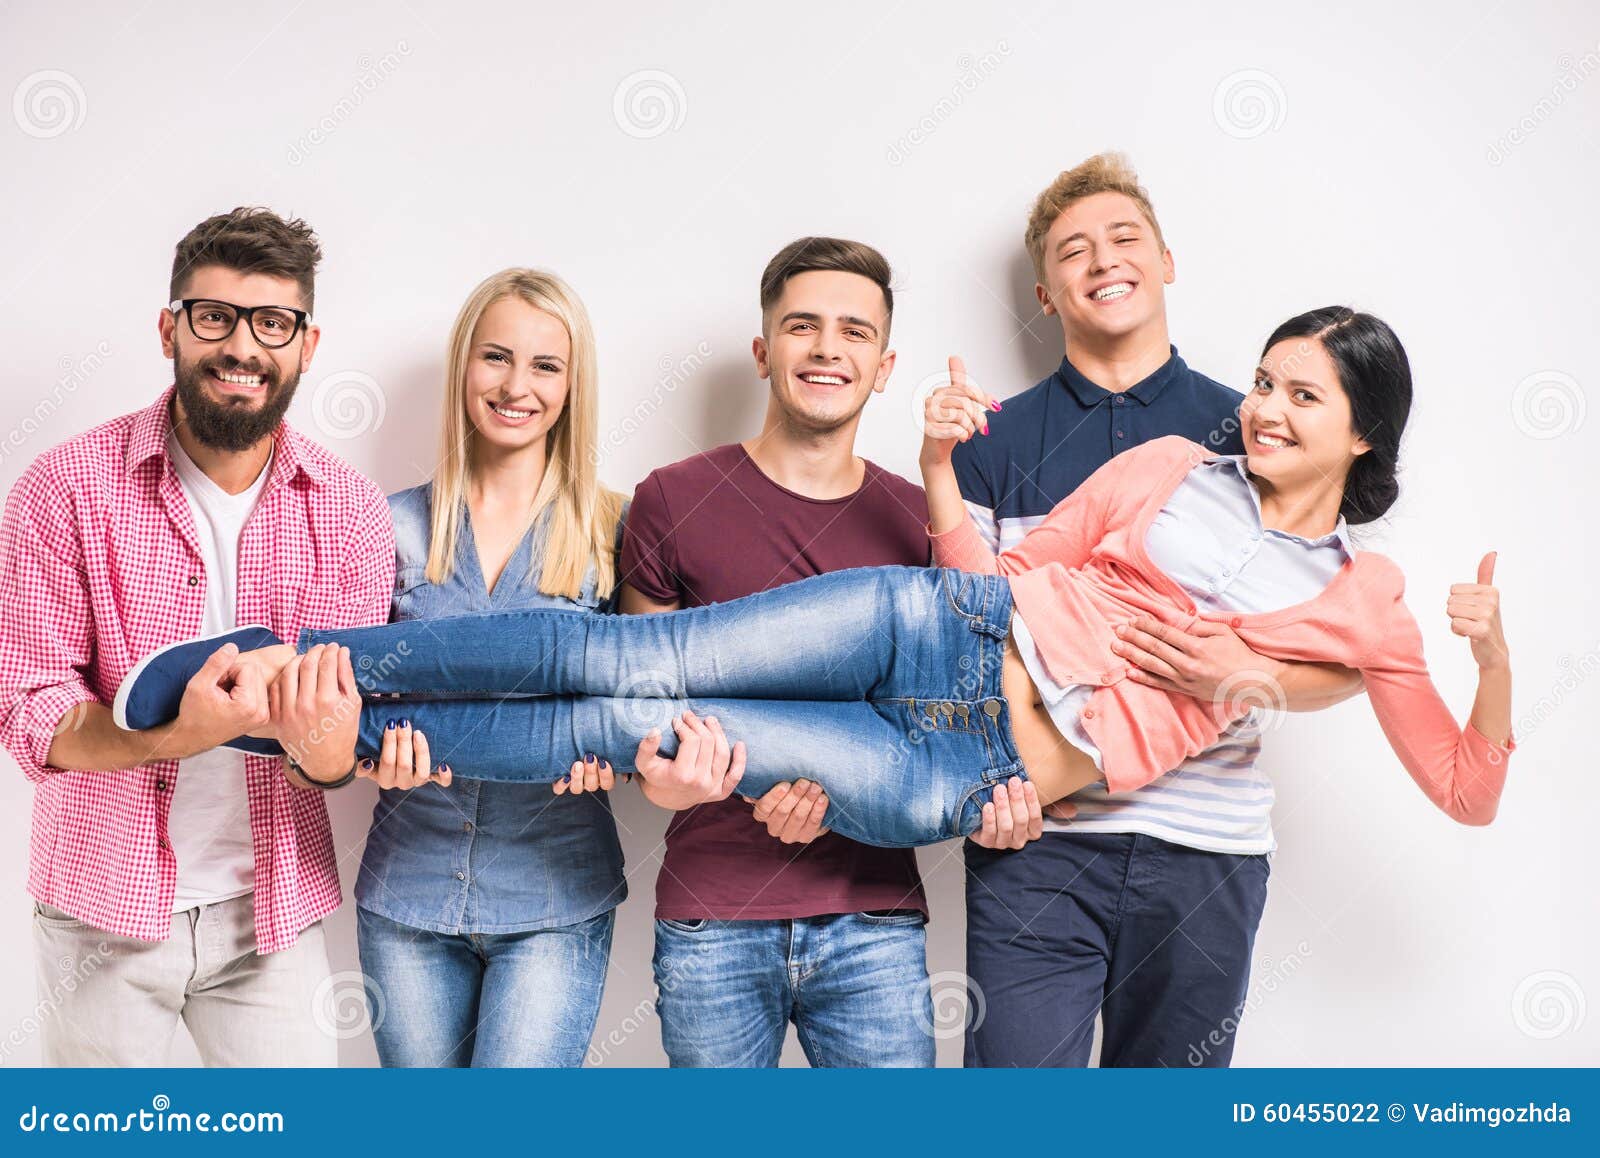 Group of people stock photo. Image of happiness, college - 60455022